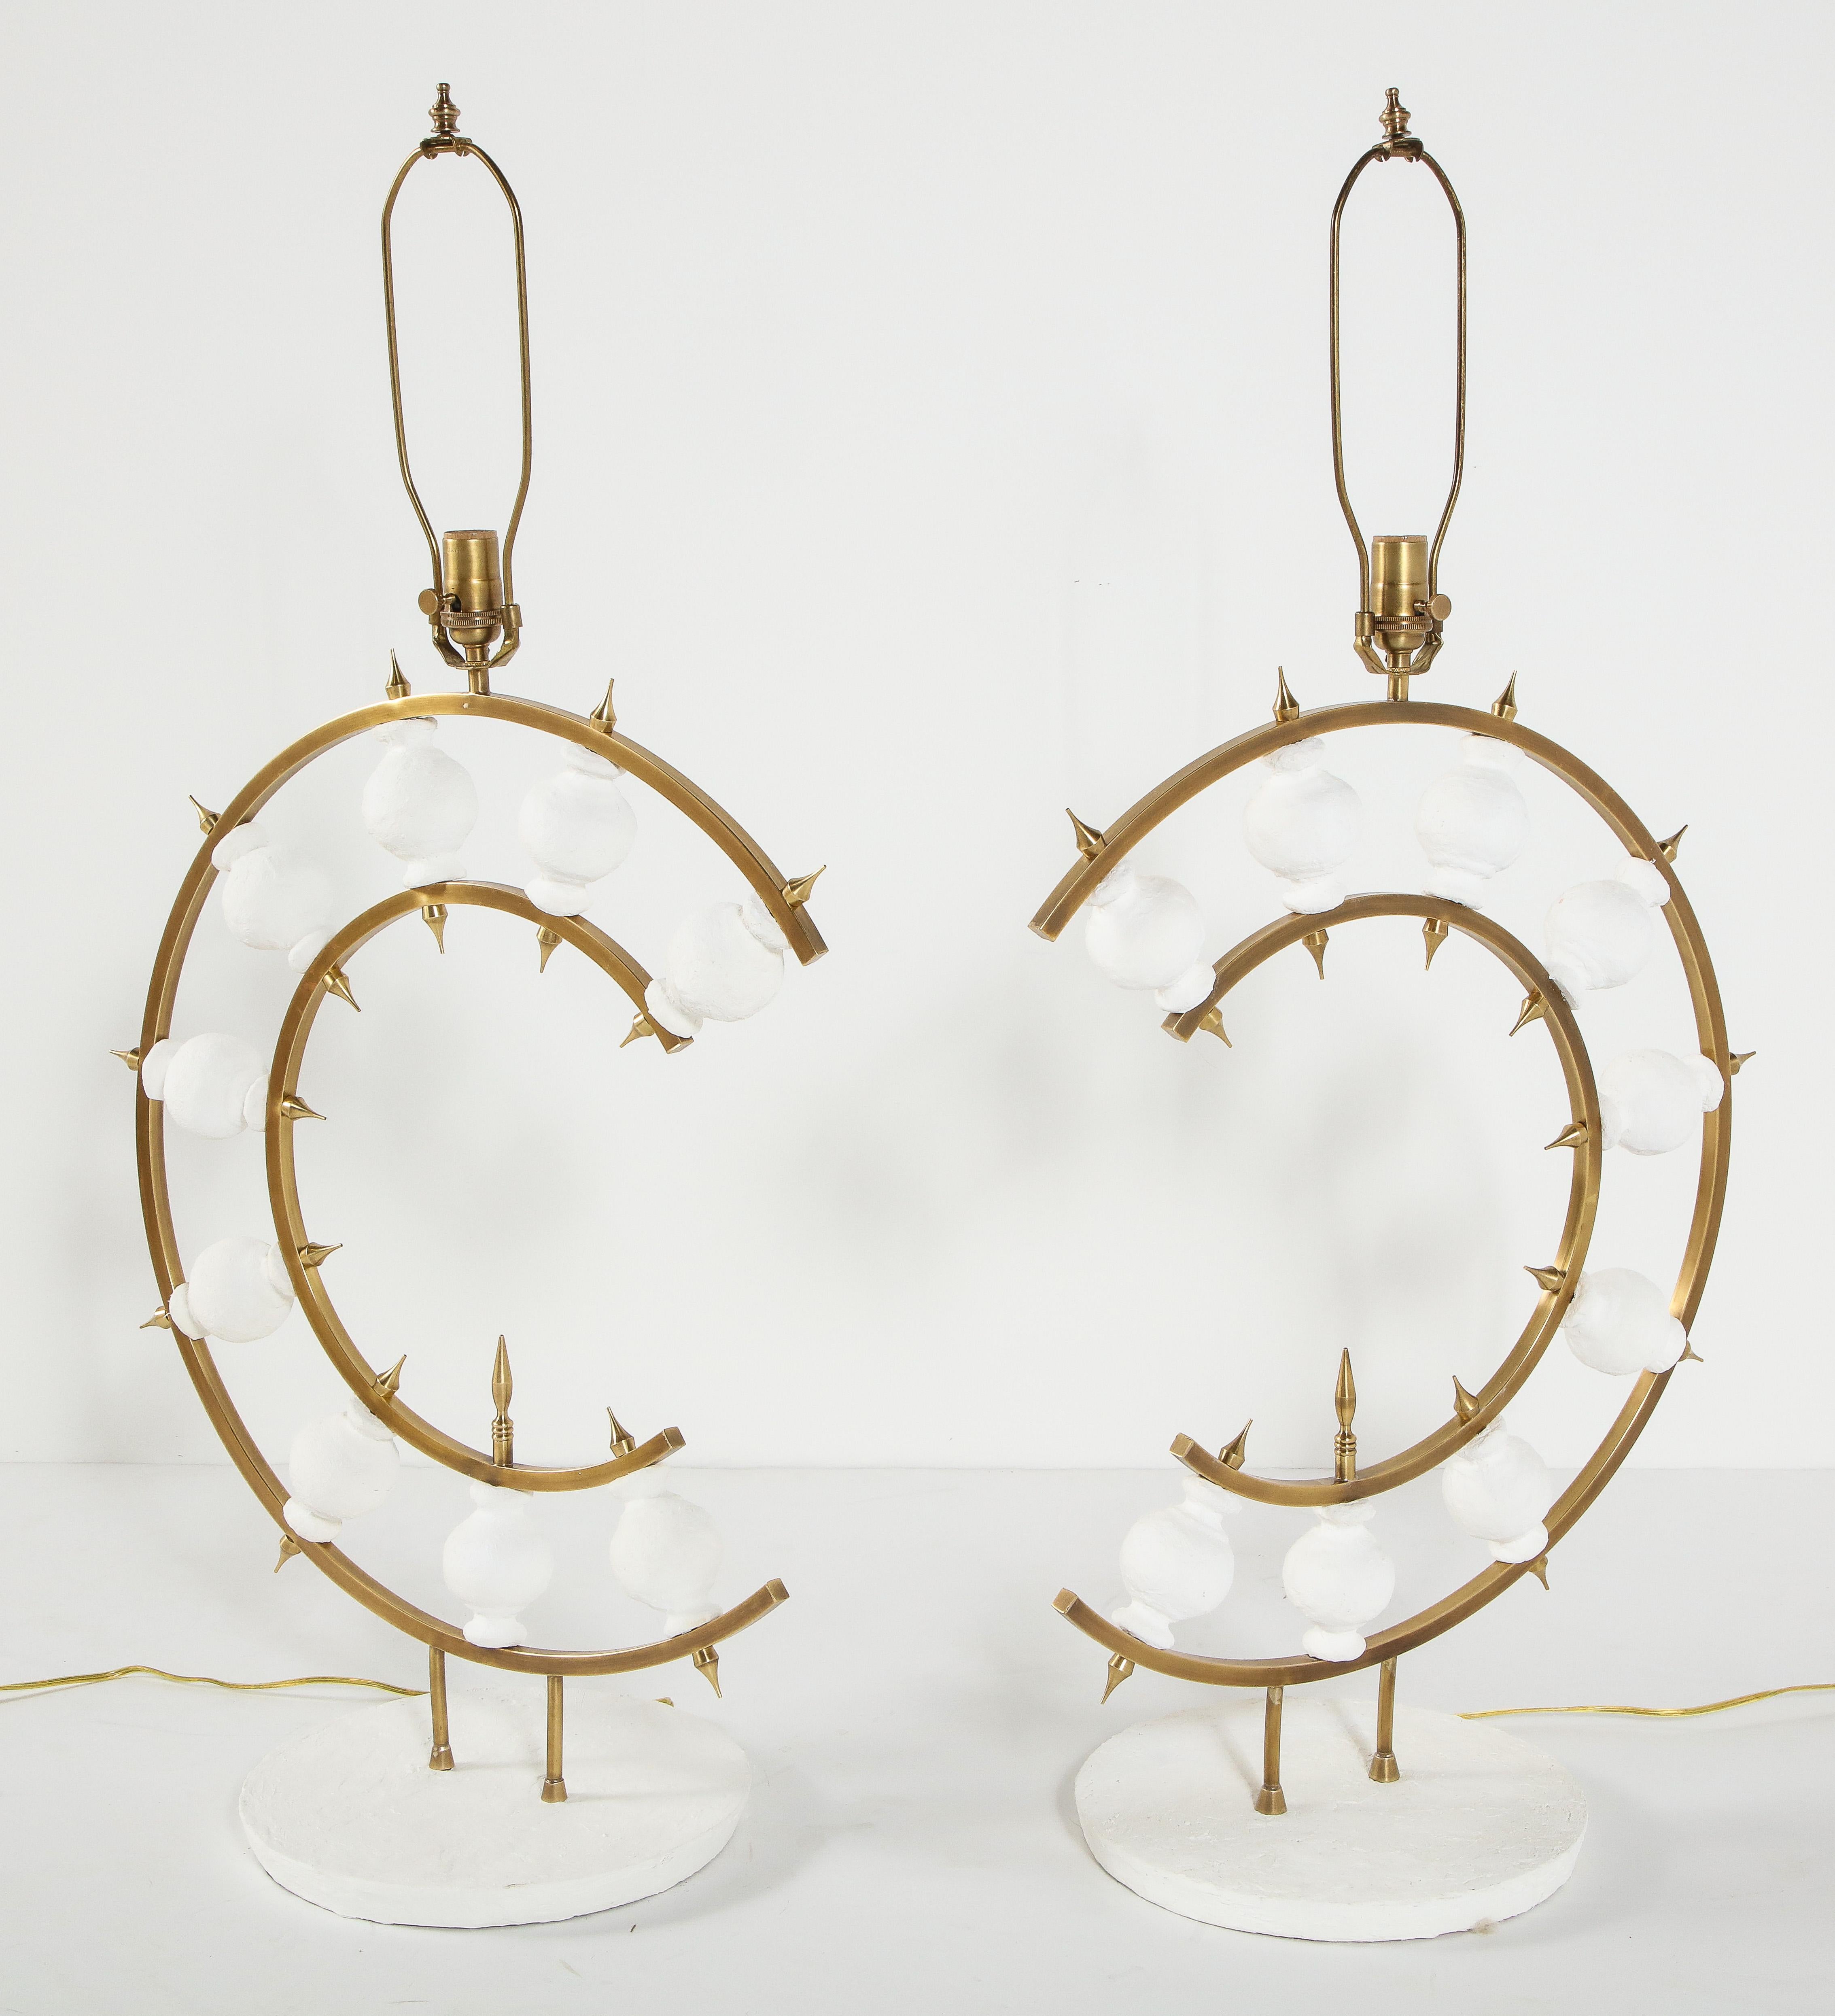 Pair of Lamps, Plaster and Brass, Organic Shape, Contemporary Tall Lamps Design For Sale 2